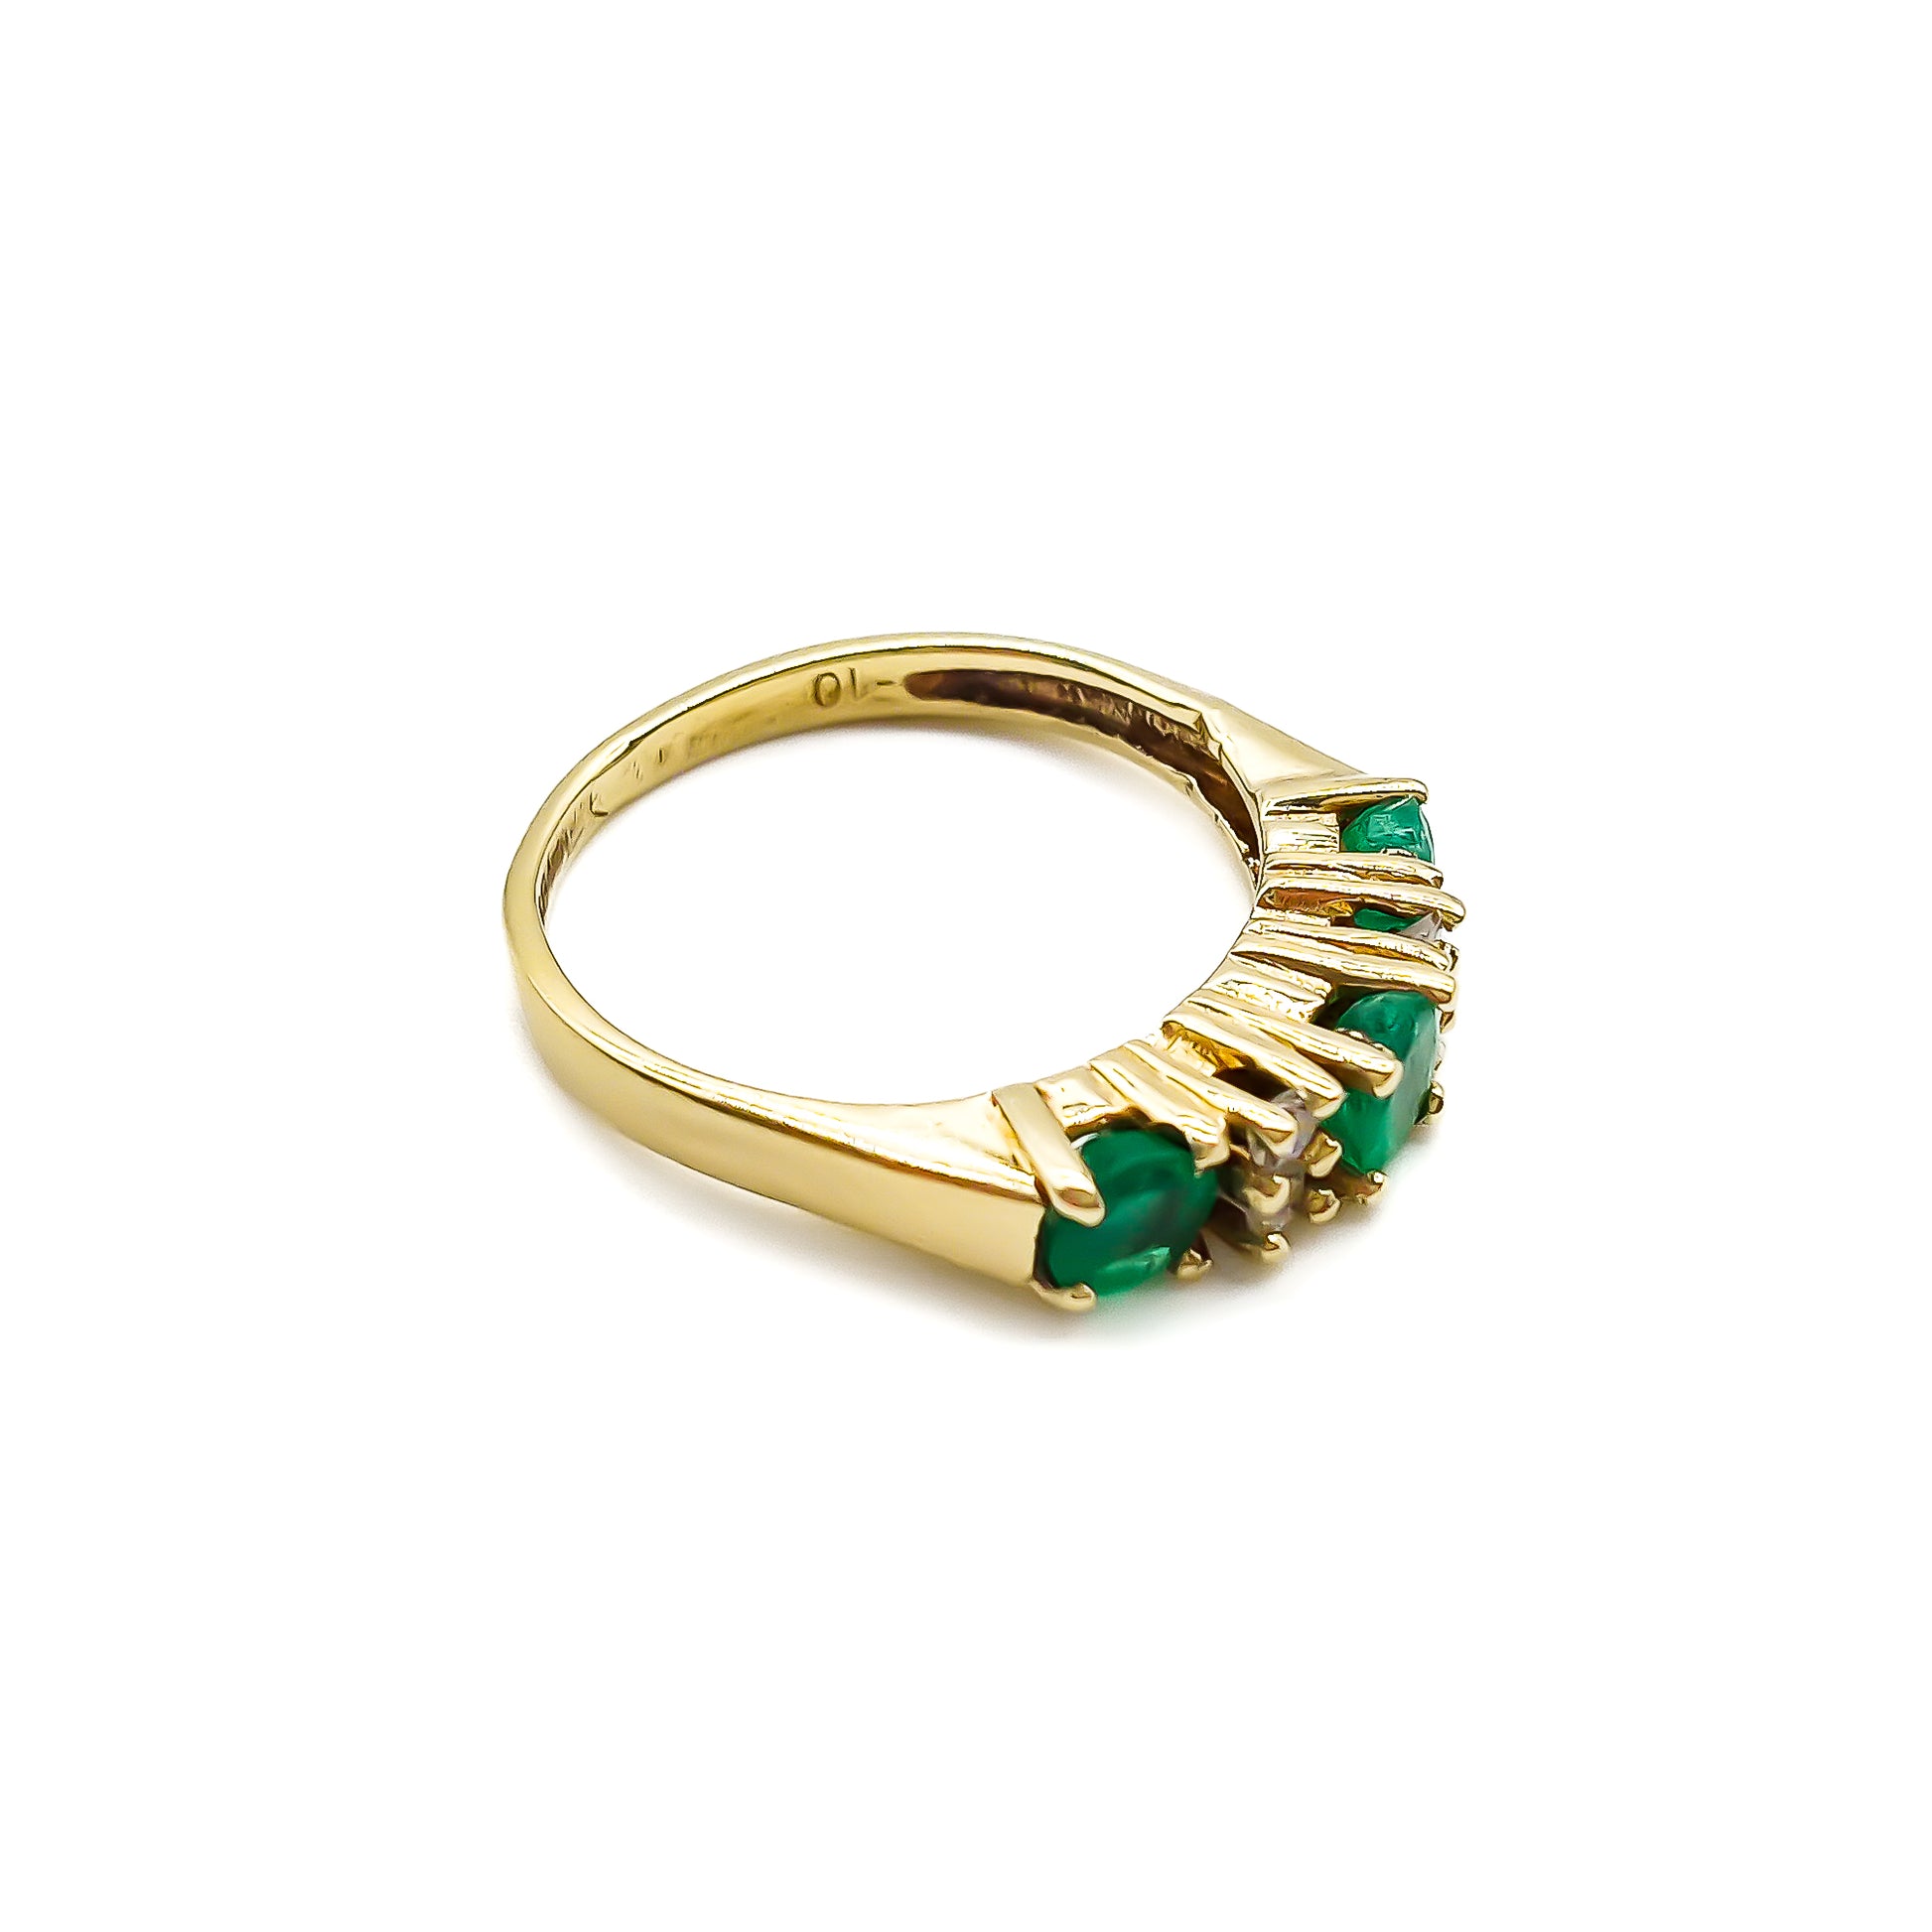 Classic vintage 14ct yellow gold ring set with three round emeralds and four small diamonds.